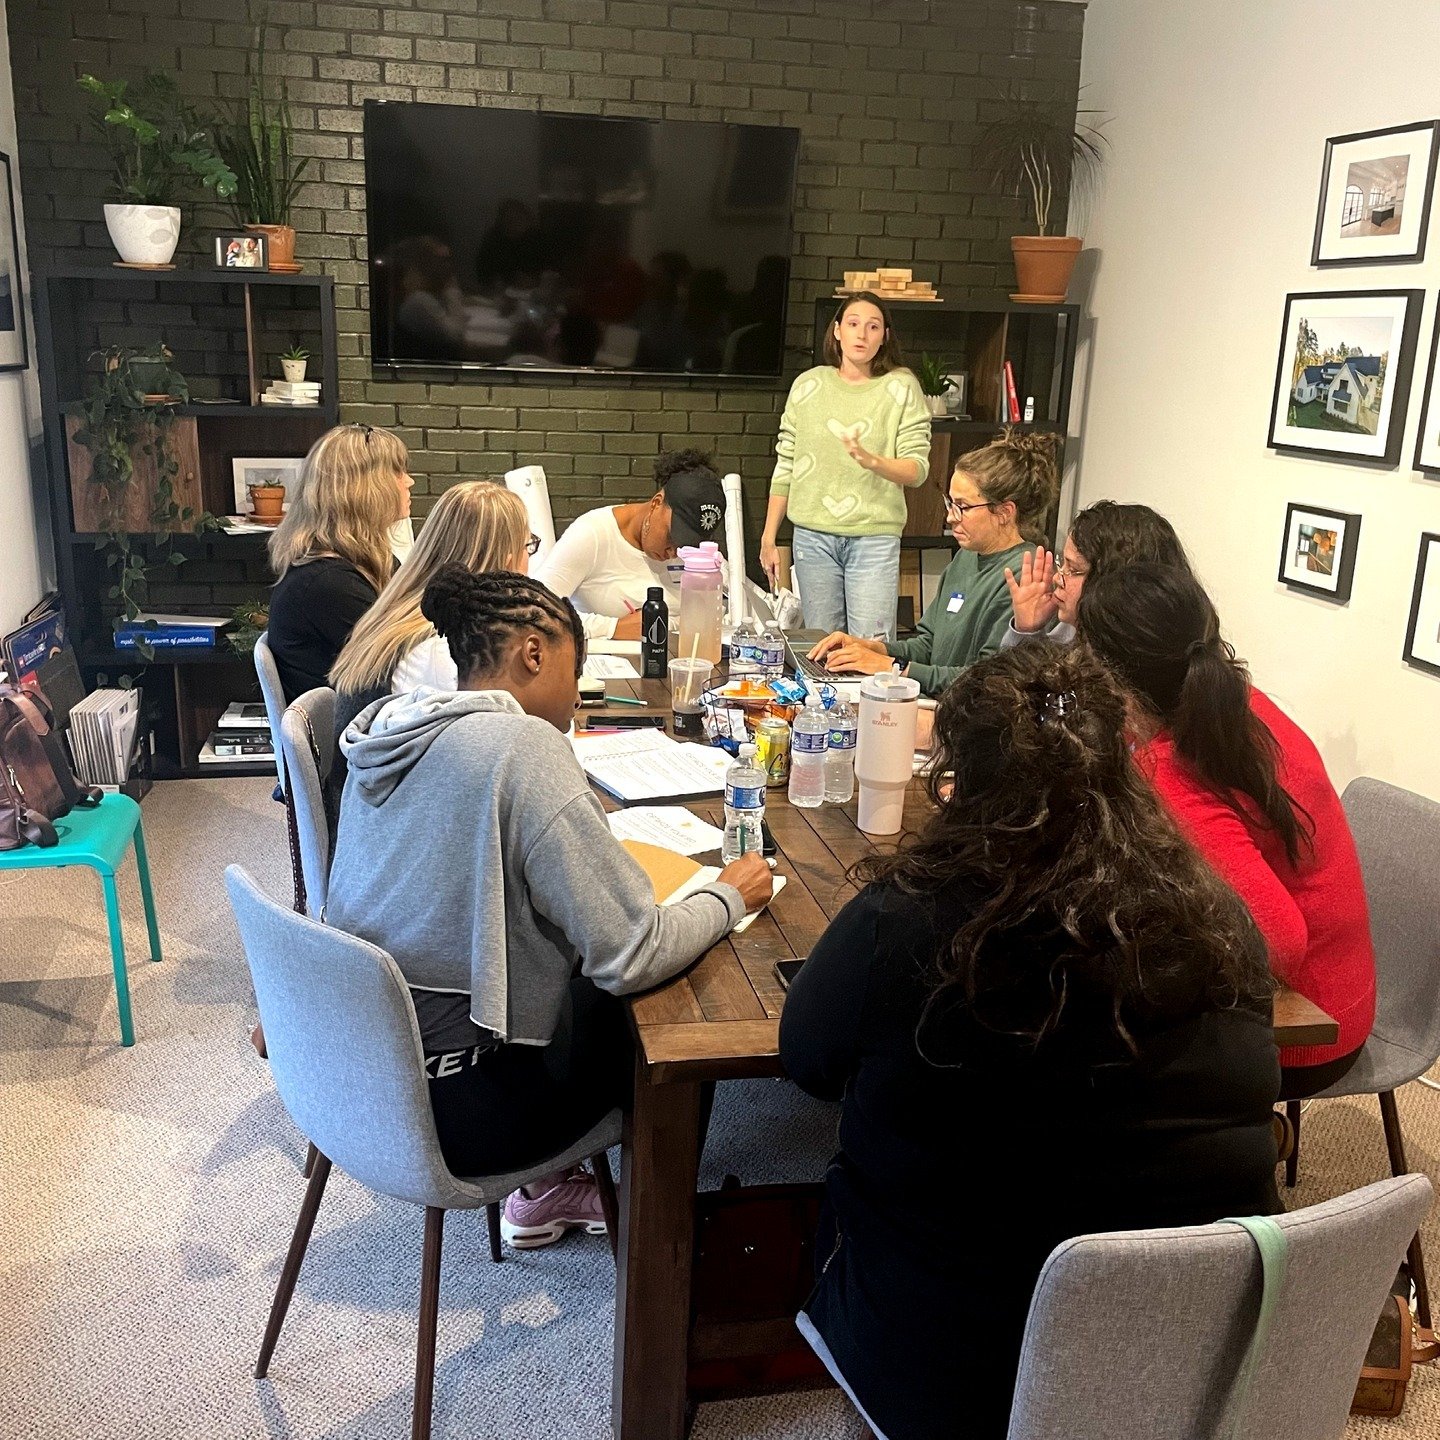 Let's give another big thank you to Alexandra Smith of Squash Blossom Social @artintheqc for leading the Social Media for Business workshop last week 👏👏👏

It's always inspiring to sit in a room surrounded by other entrepreneurs, but even more so w